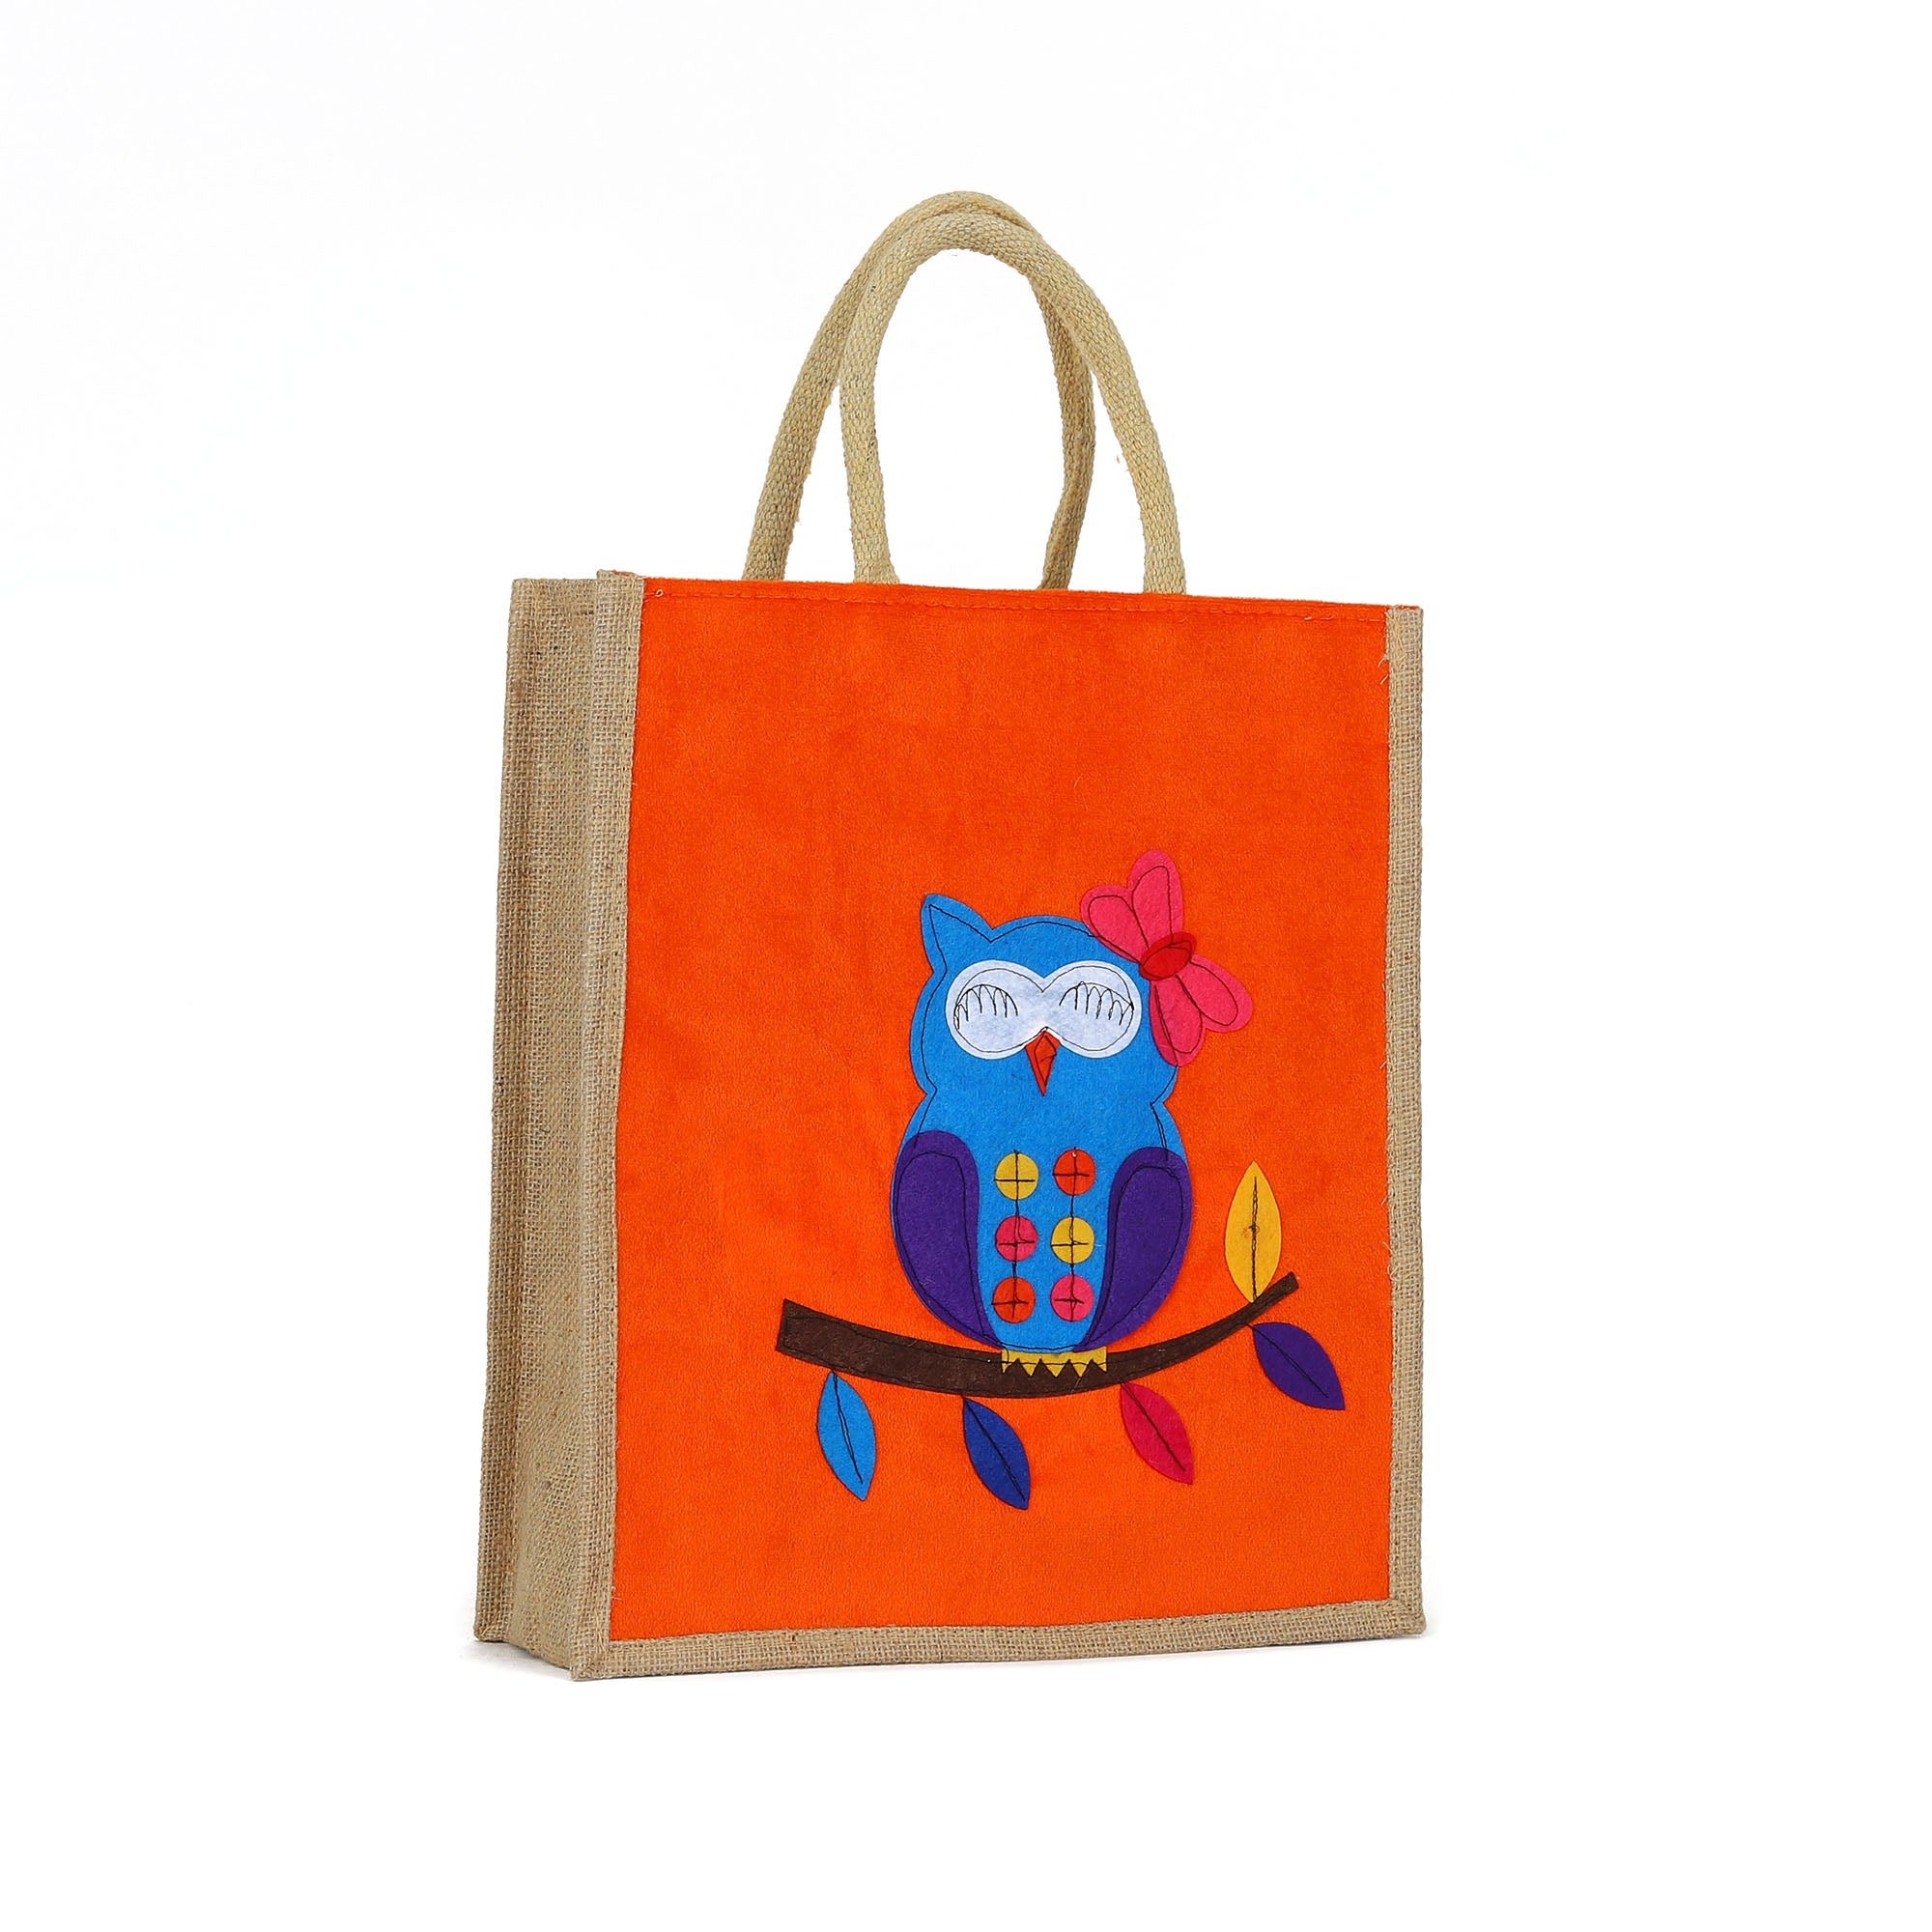 Embroidered Owl Tote Bag